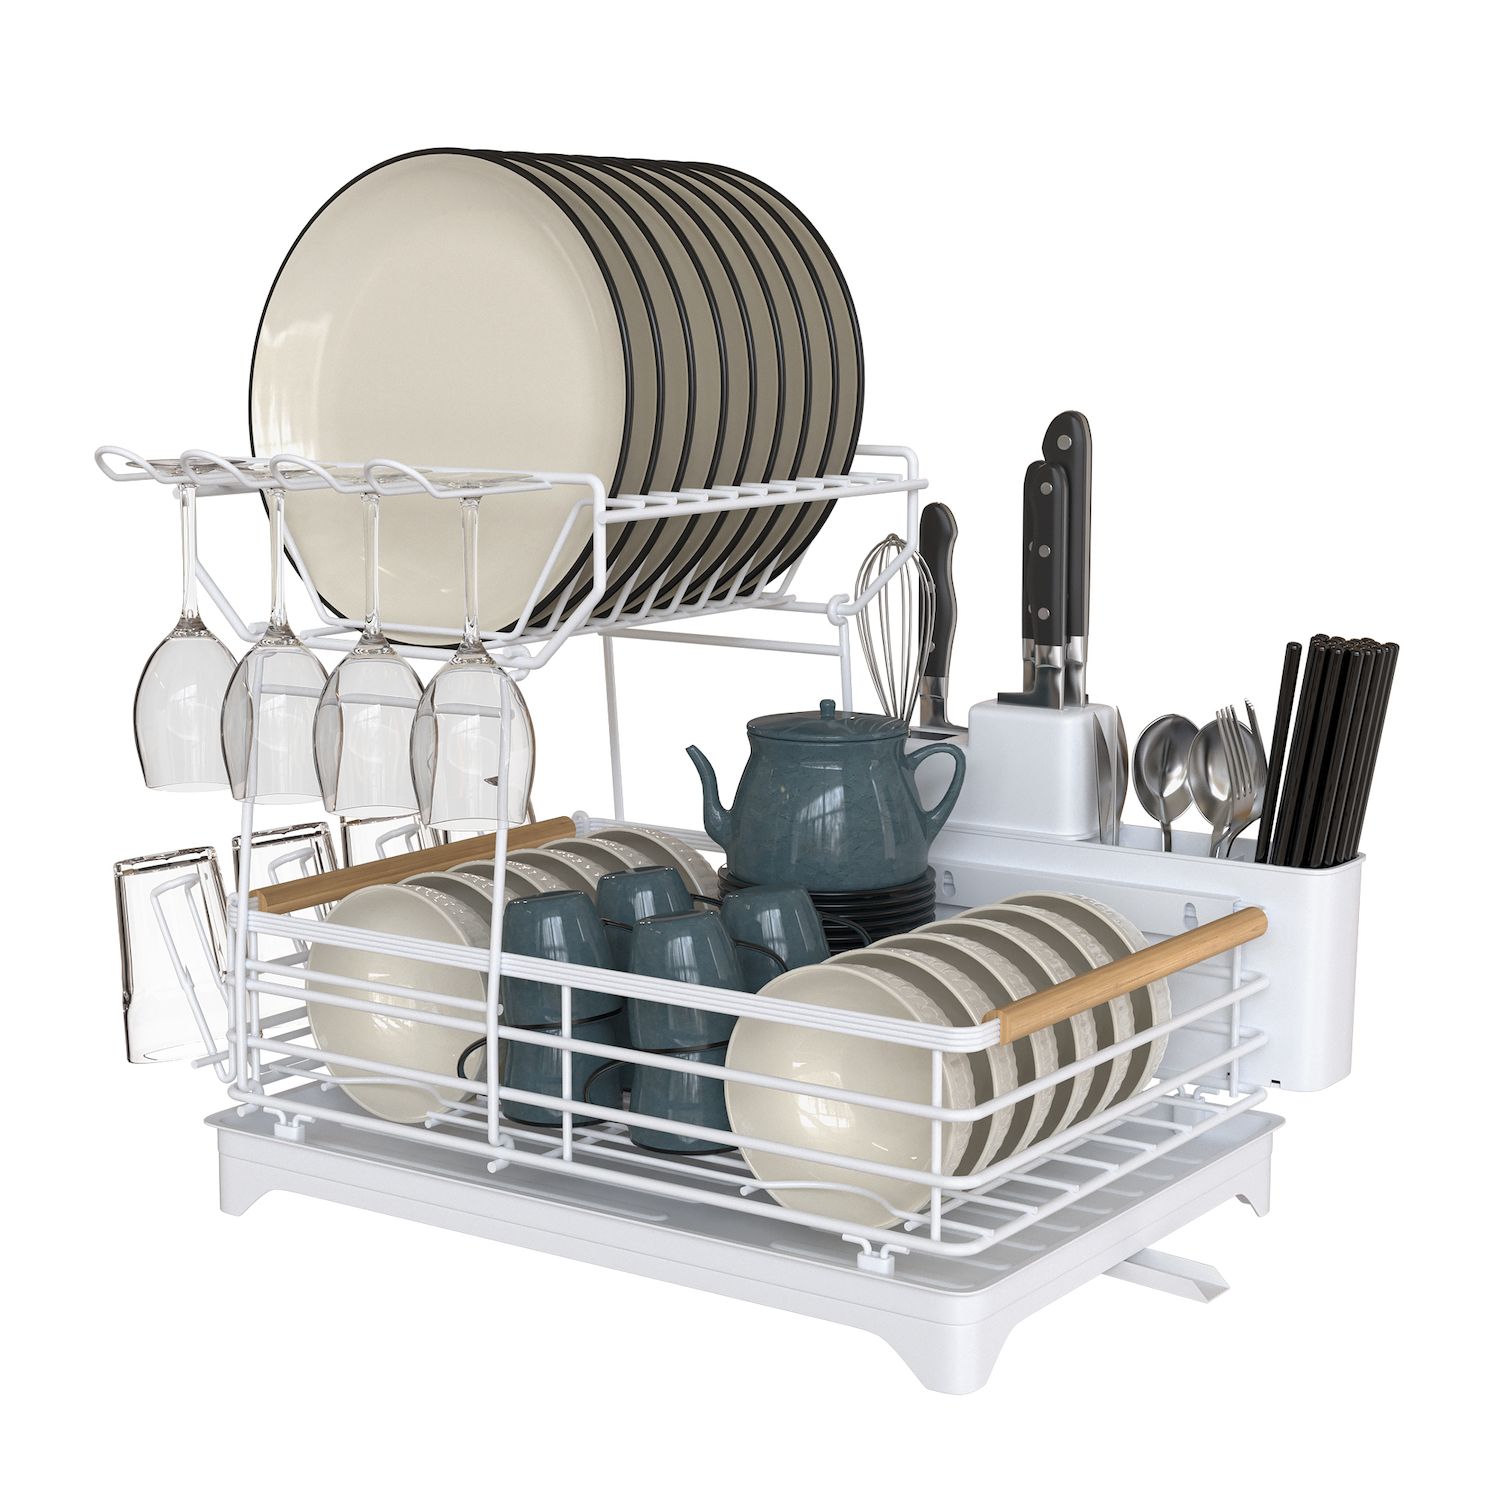 Zulay Kitchen Foldable Bamboo Dish Drying Rack - 2-Tier, 1